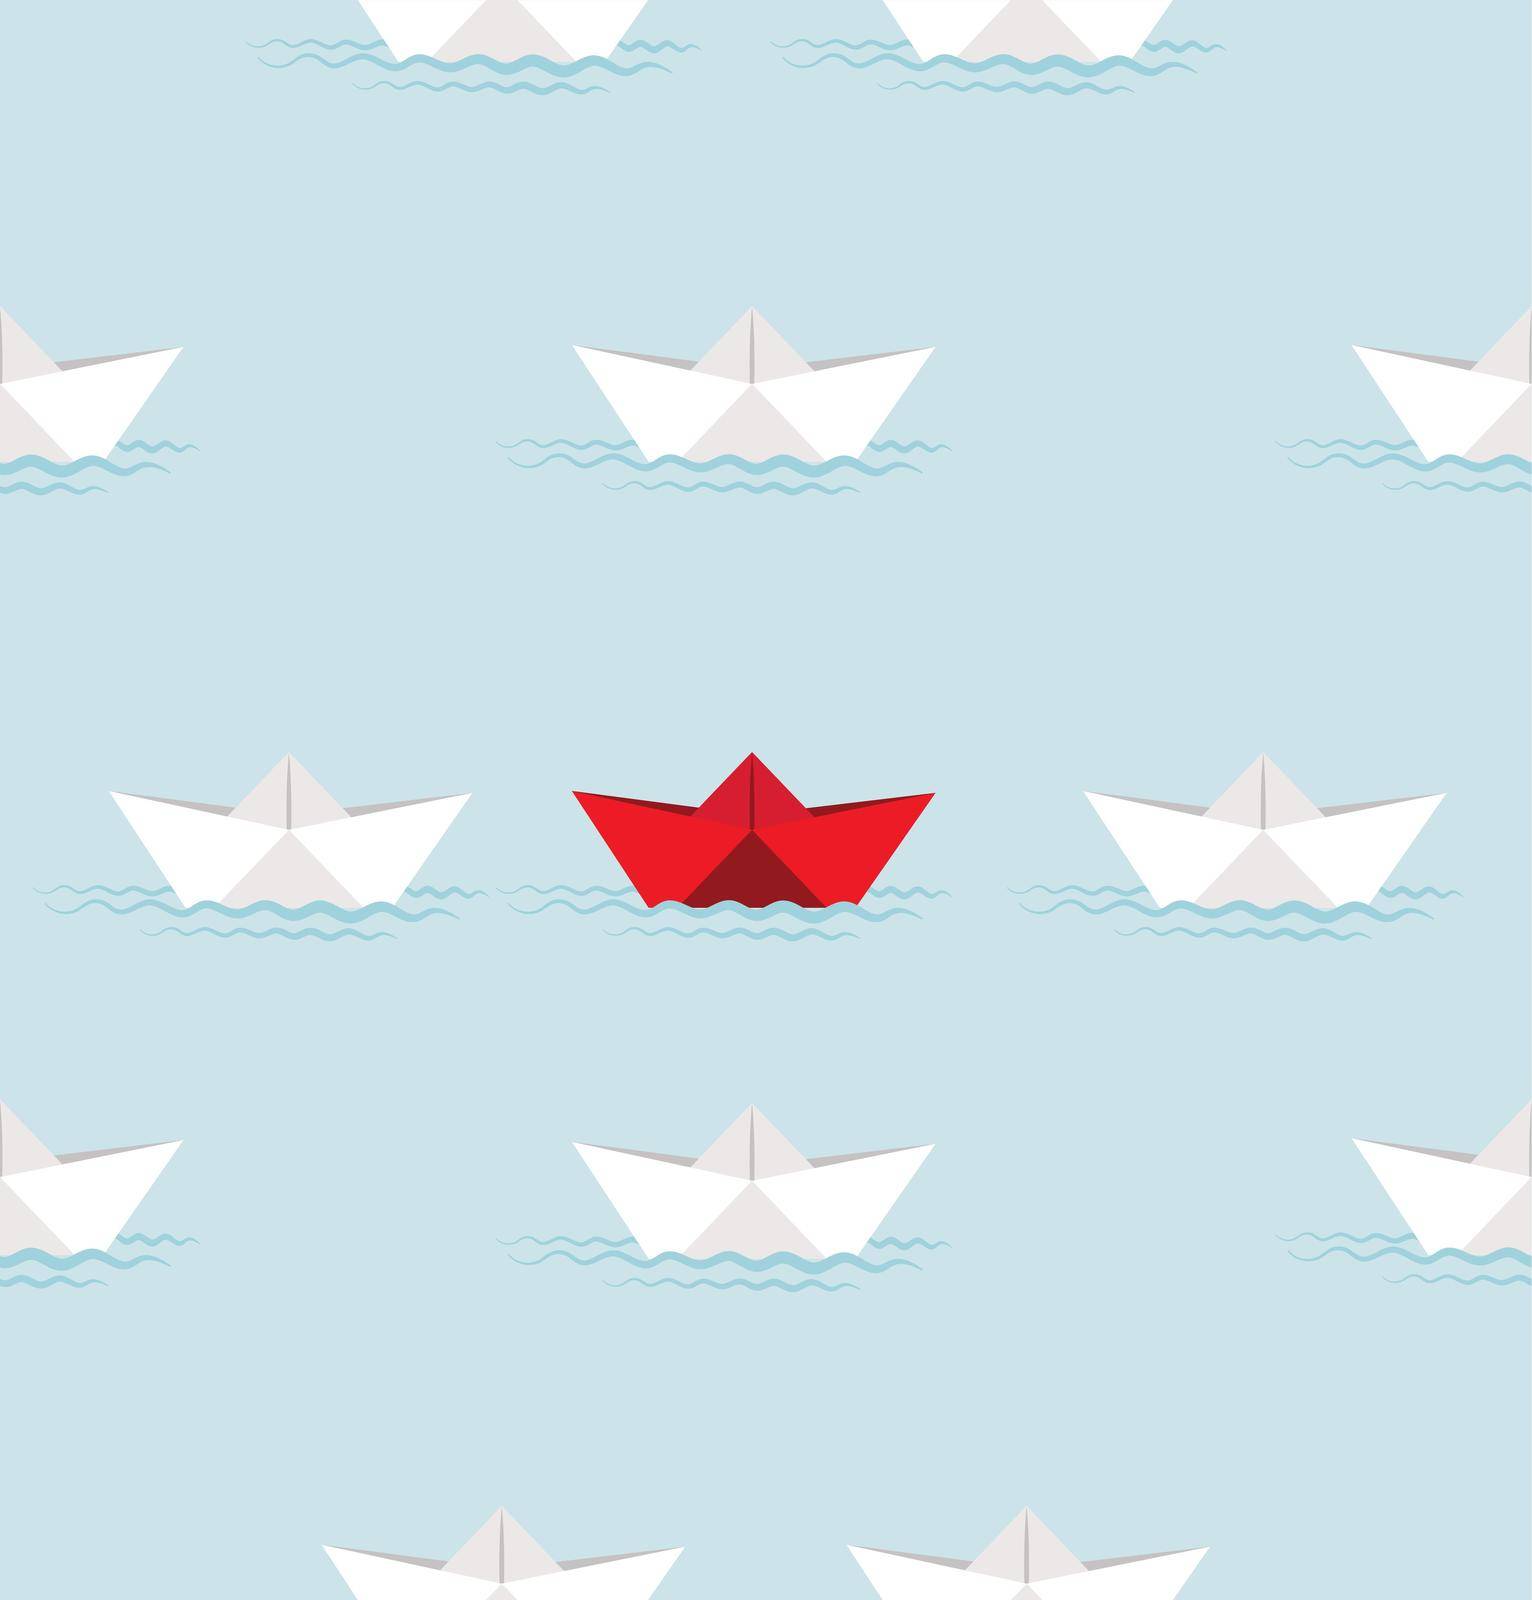 Red Paper boat and white paper boat  in water pattern by focus_bell